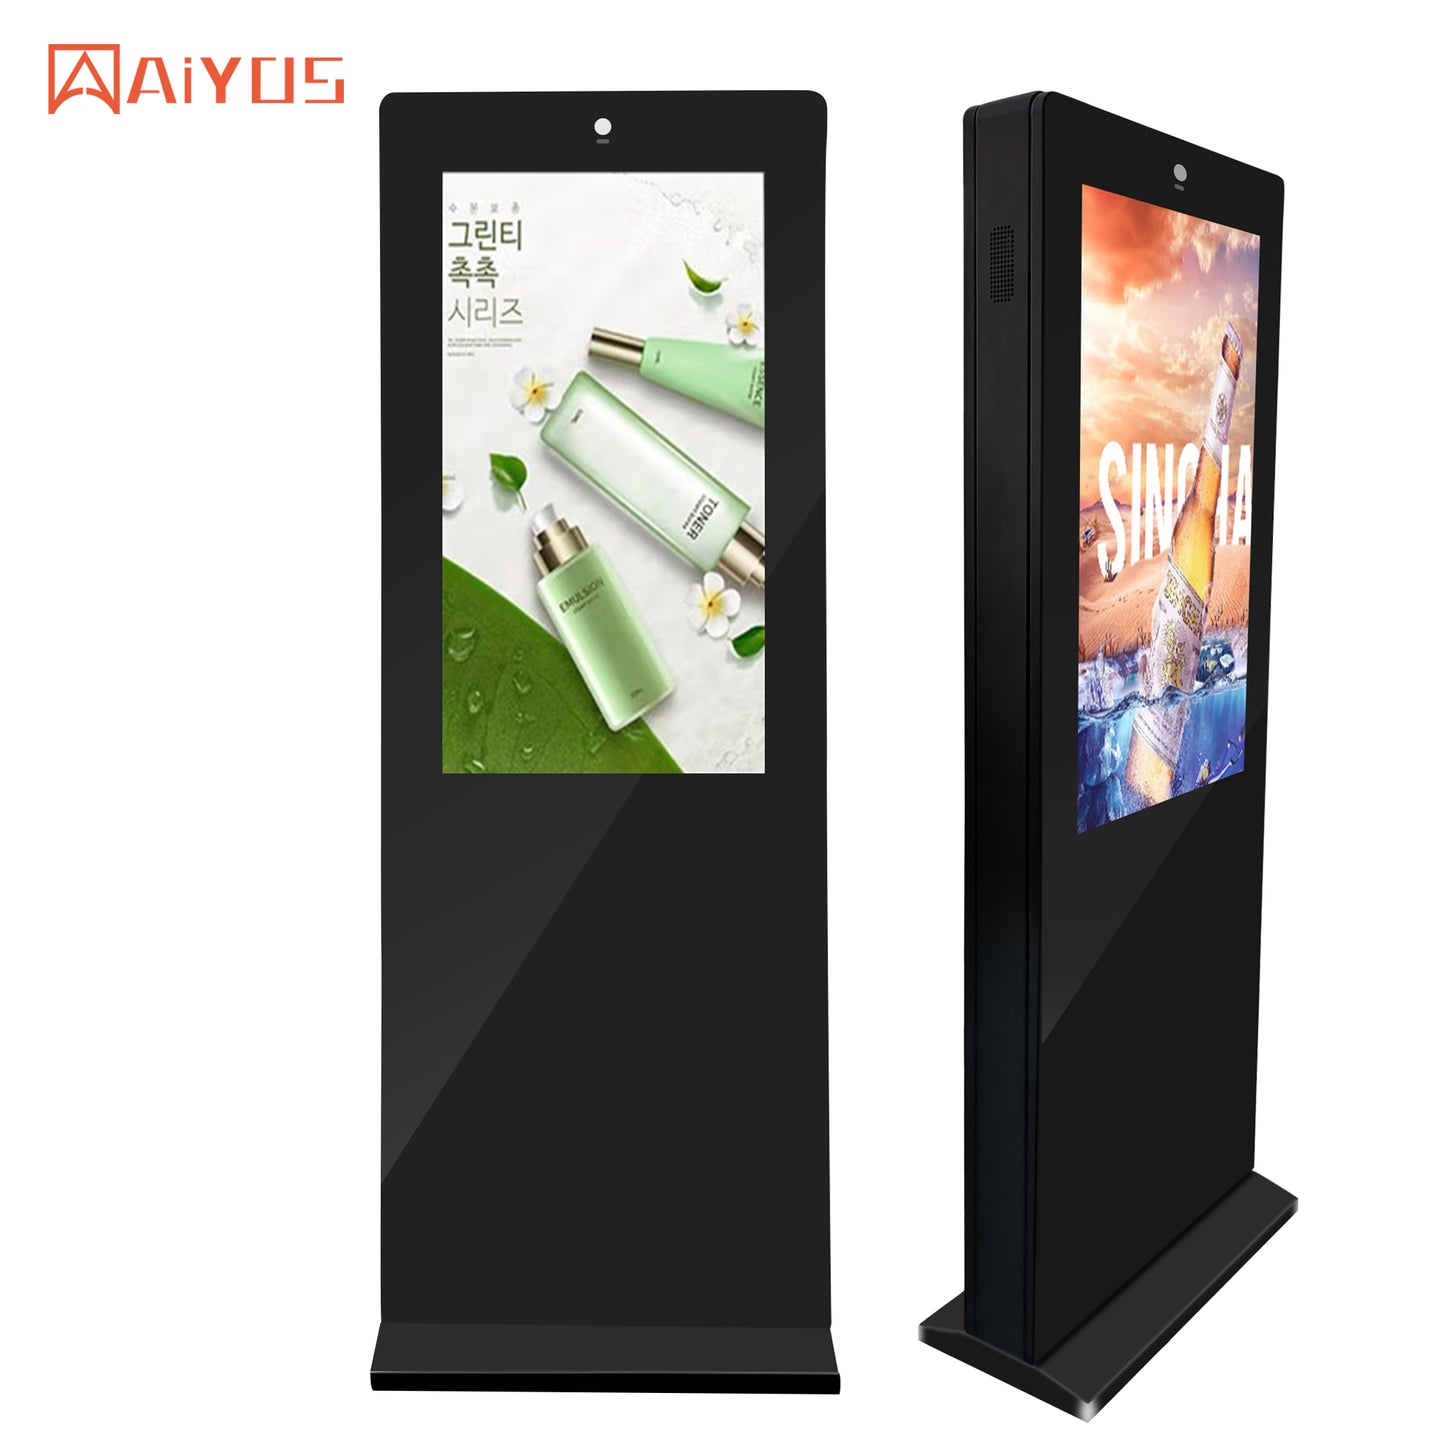 Commercial digital advertising 2500 nits High Brightness outdoor digital signage display totem ip65 Android system Nano touch screen